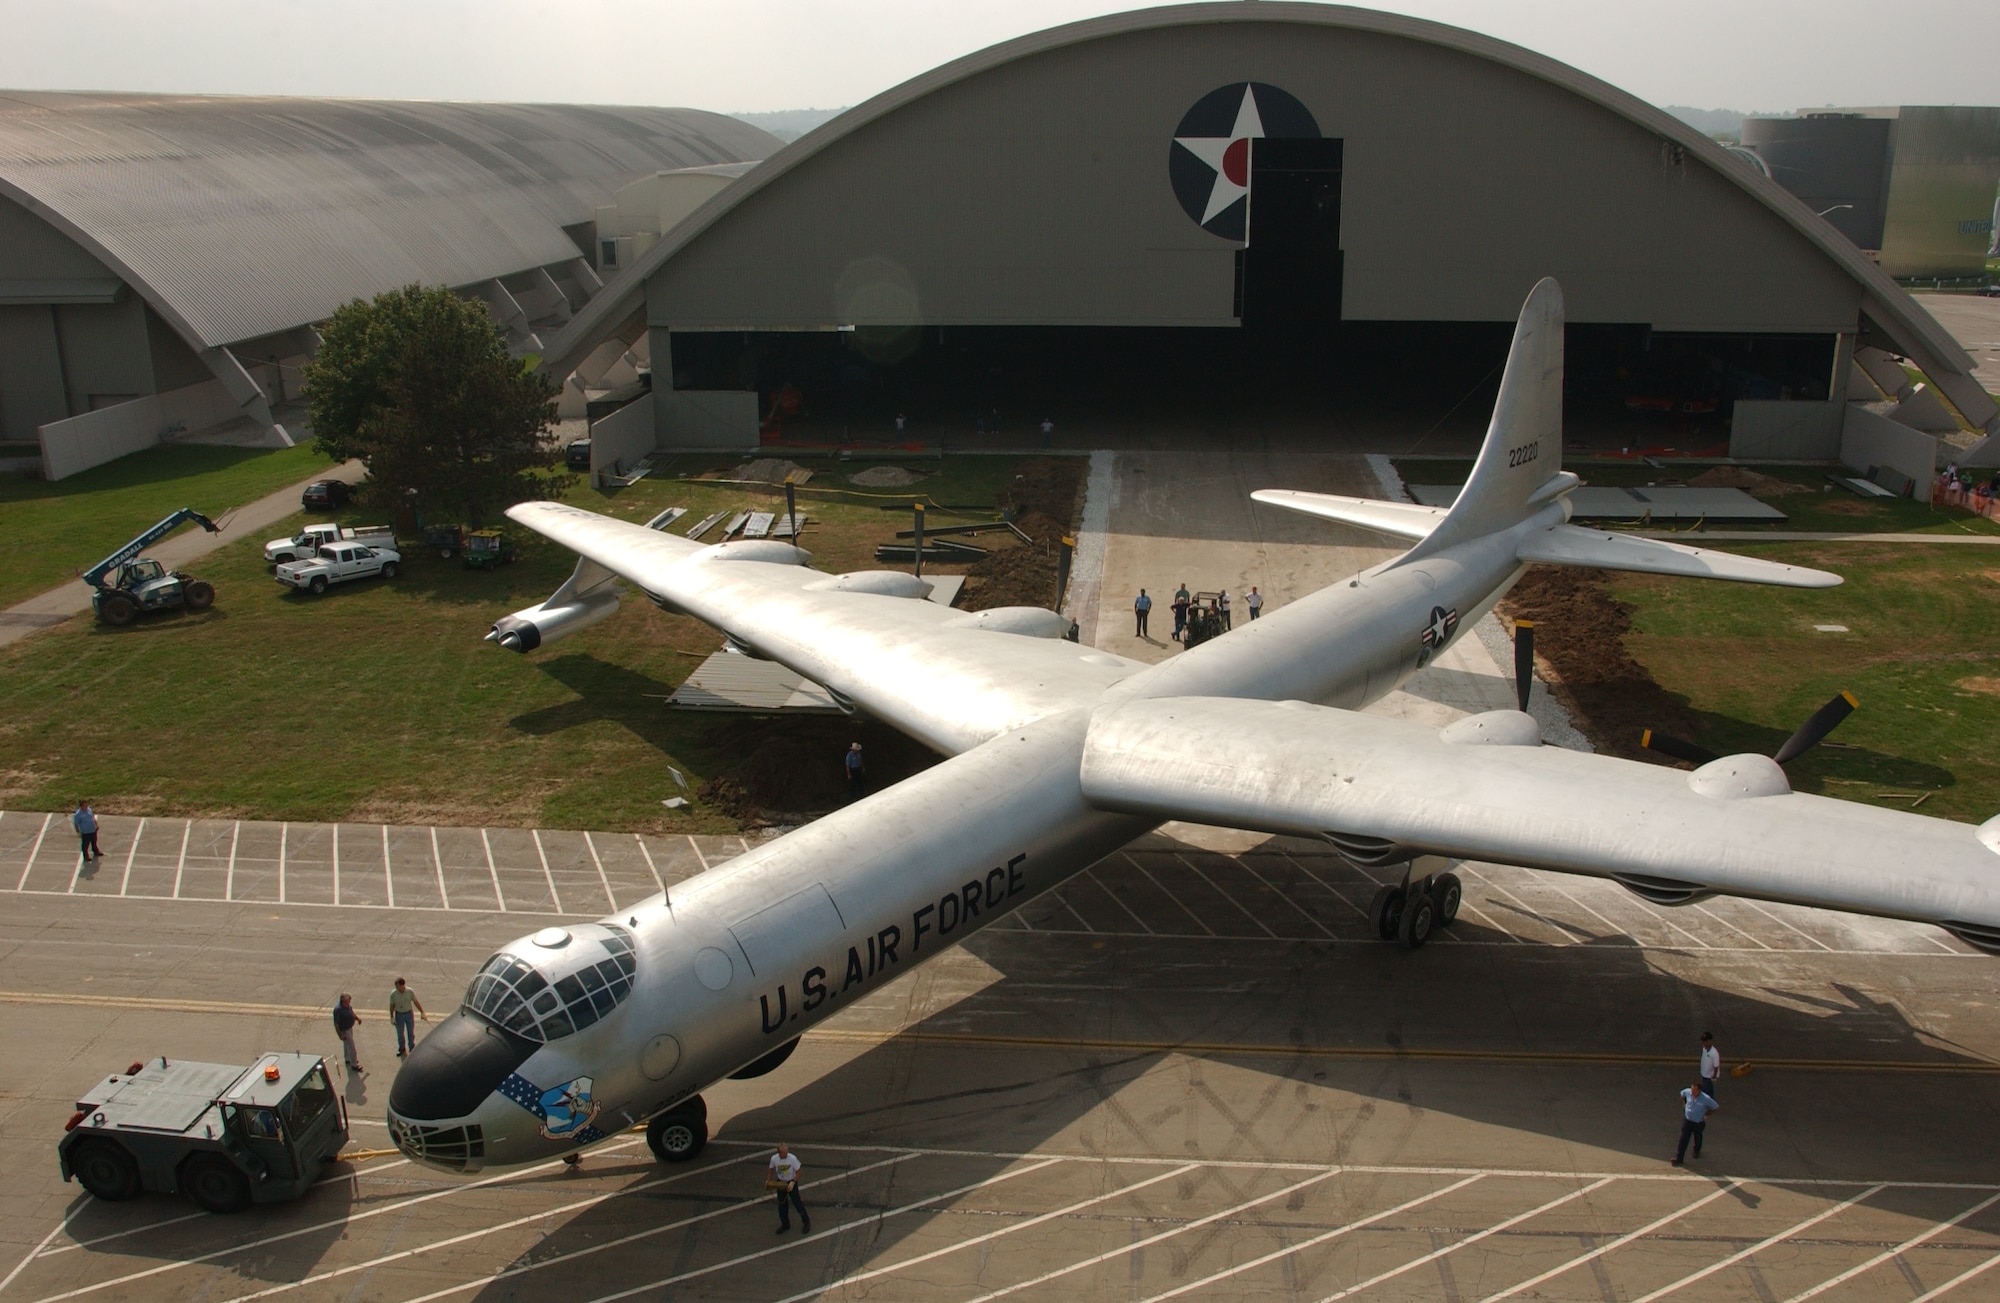 The Convair B-36J Peacemaker aircraft move from building one to building three in October, 2002 at the National Museum of the U.S. Air Force. (U.S. Air Force photo)